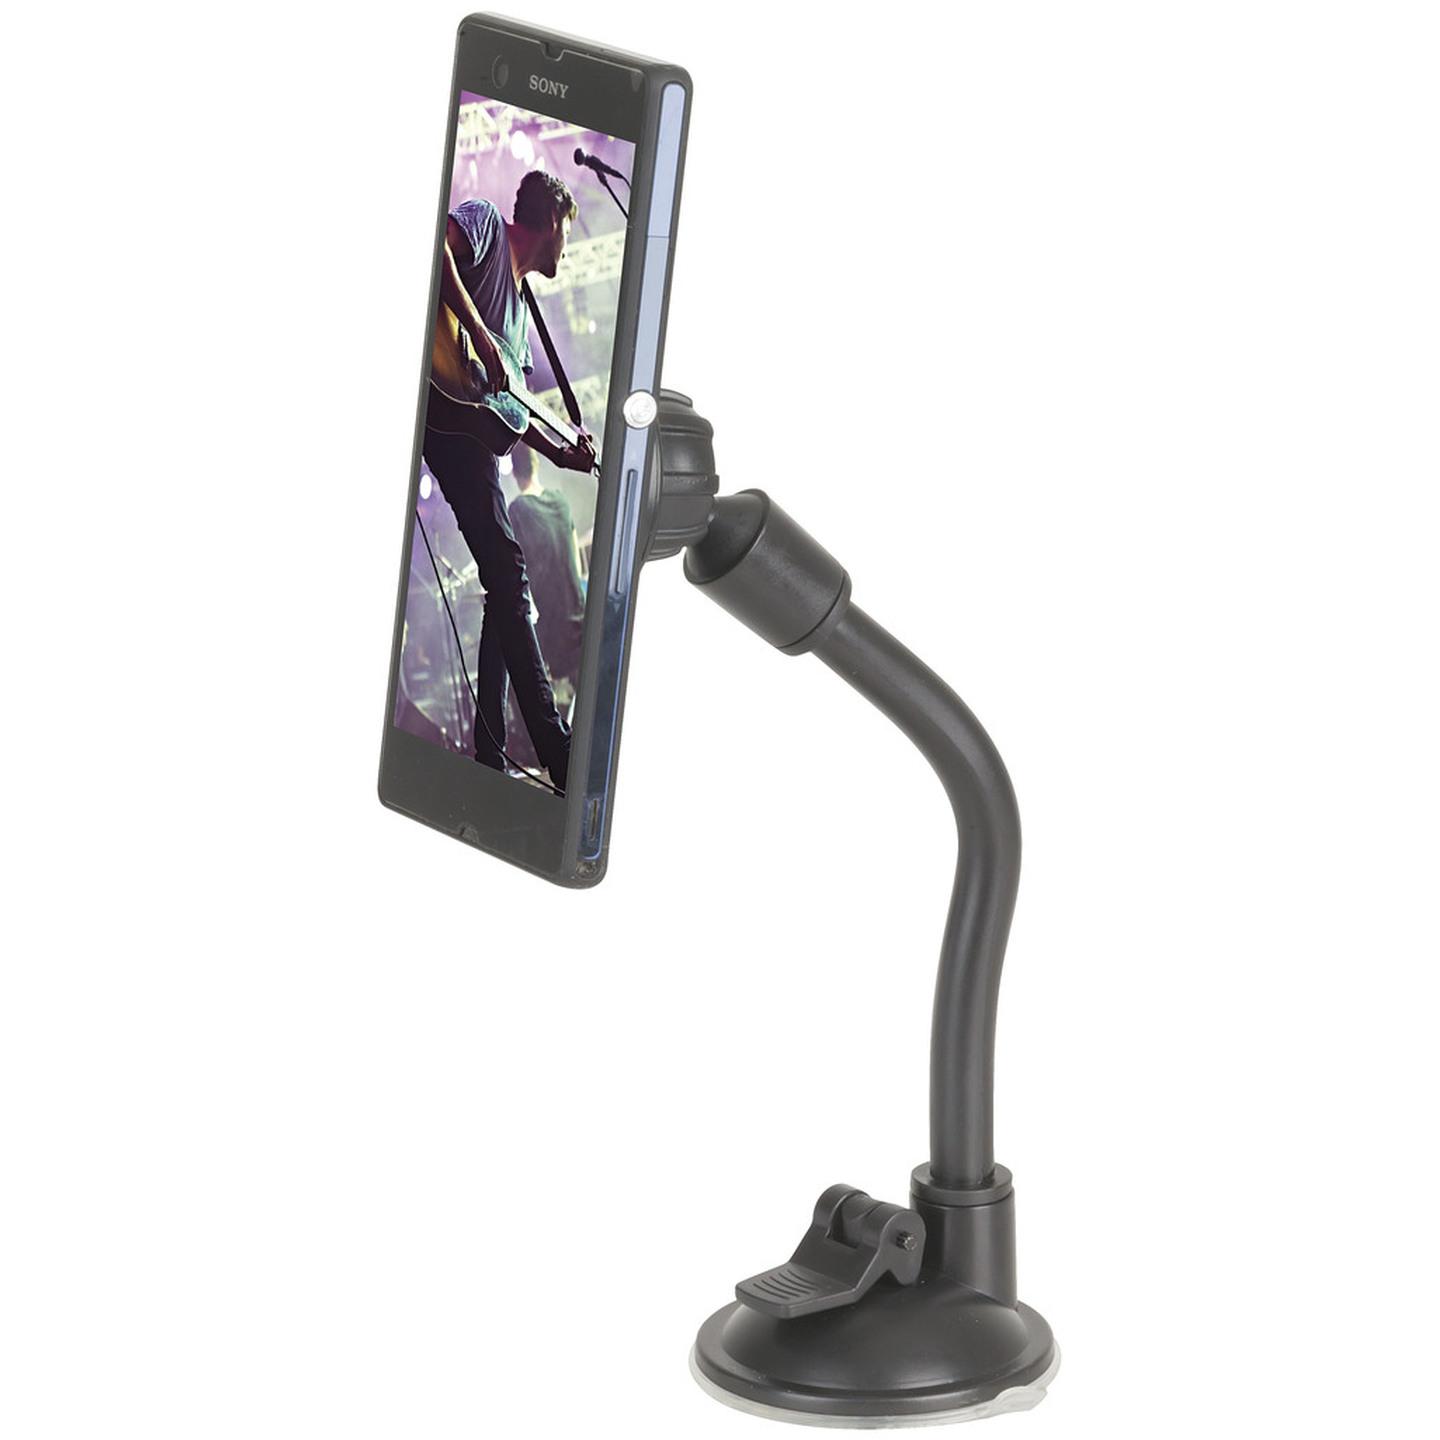 Large Flexible Magnetic Phone Bracket and Mount